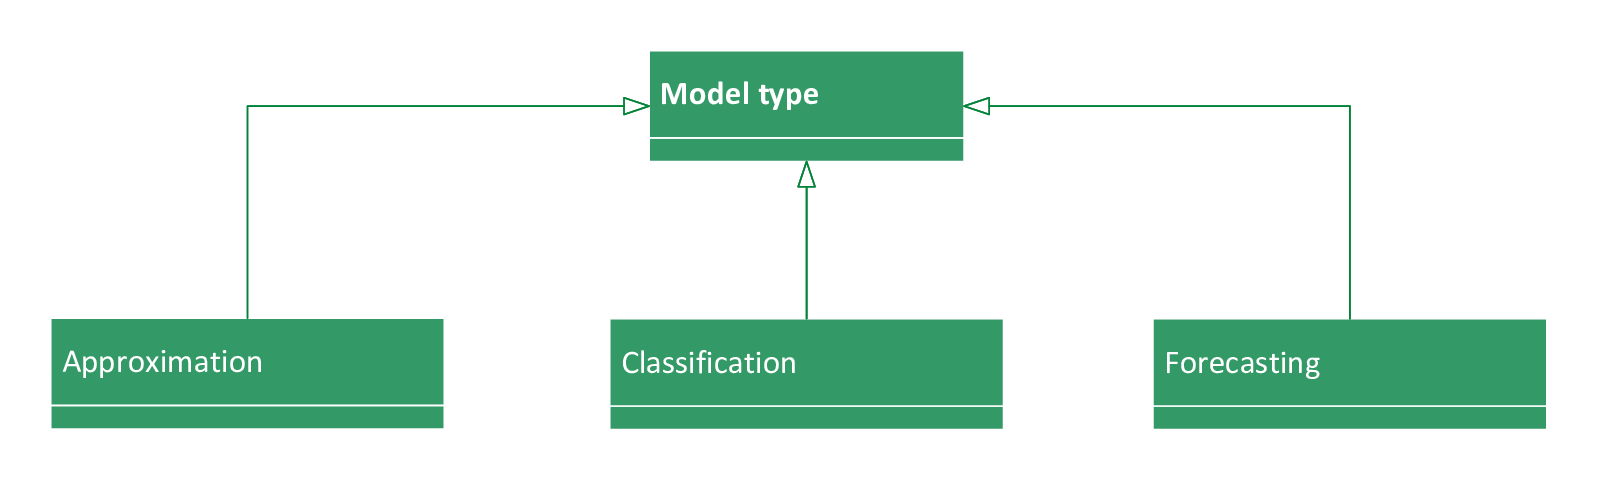 The most important types of models in machine learning are approximation, classification, and forecasting.